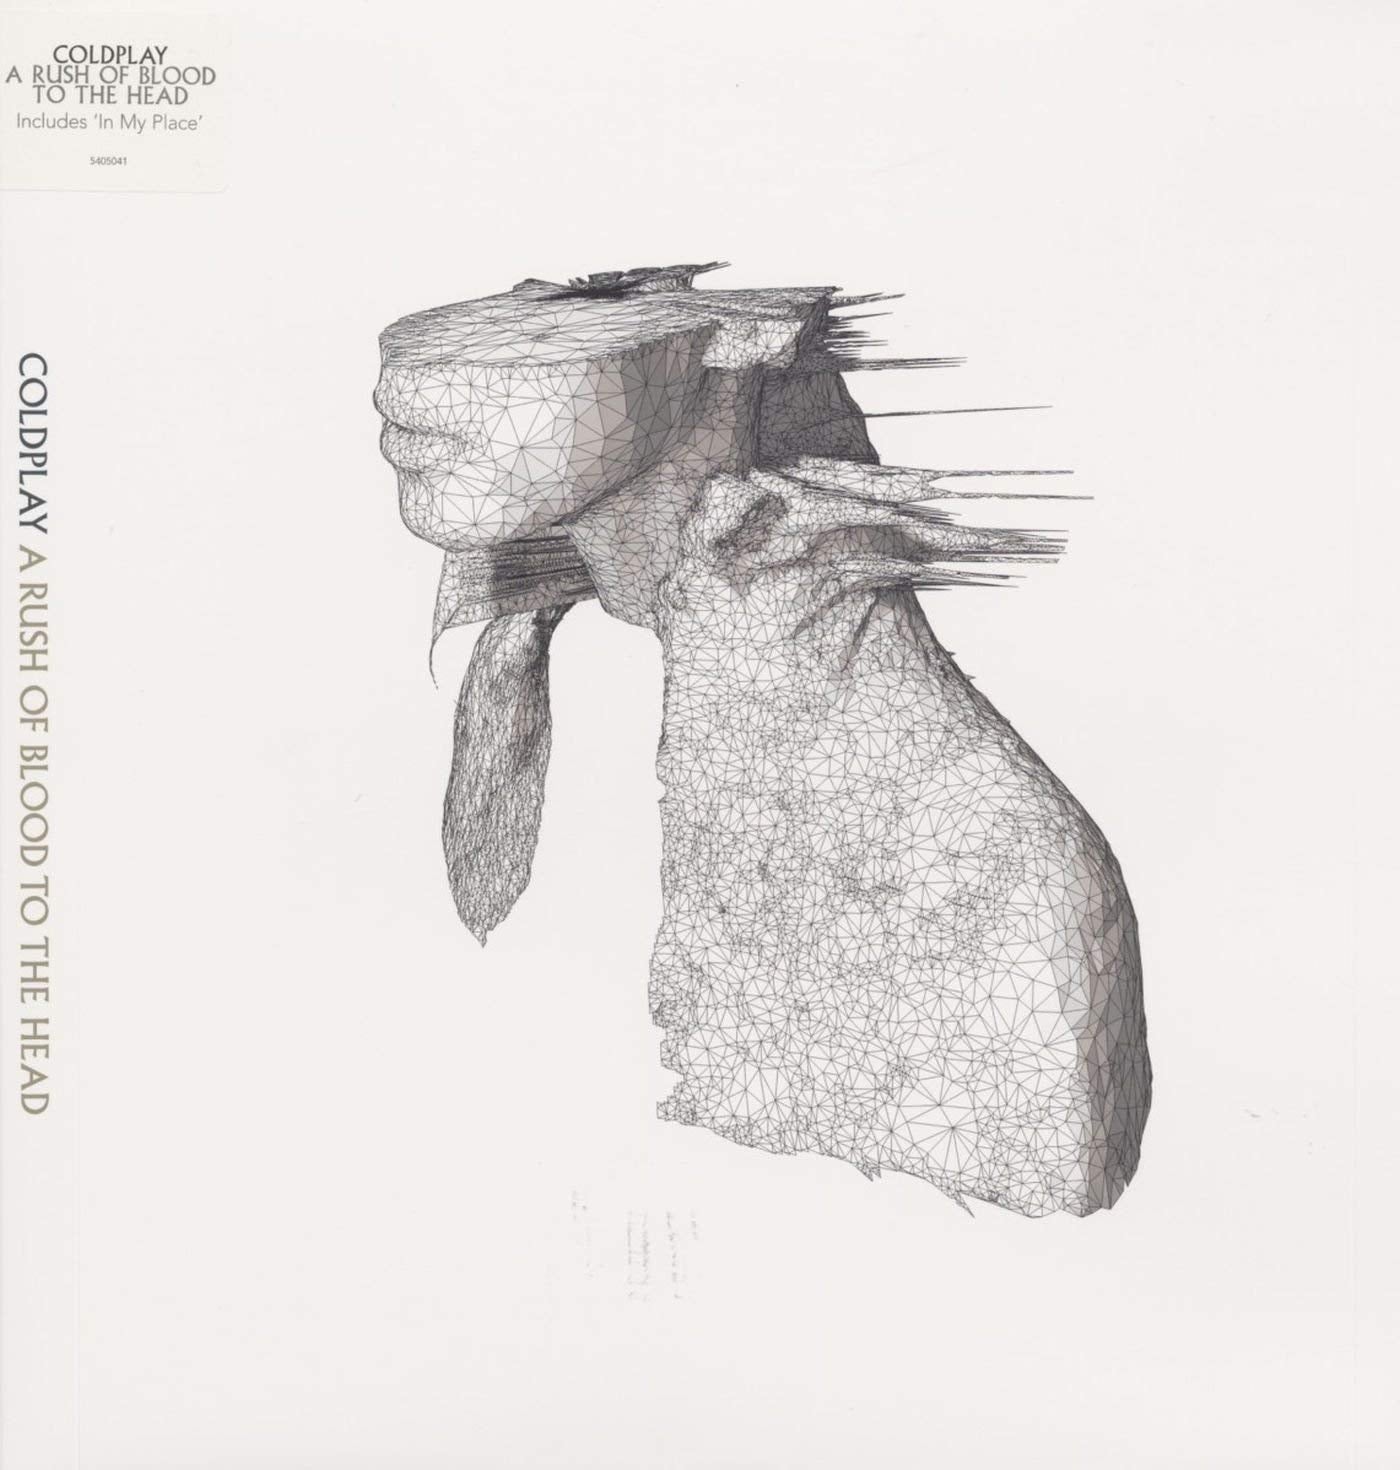 LP - Coldplay - A Rush Of Blood To The Head